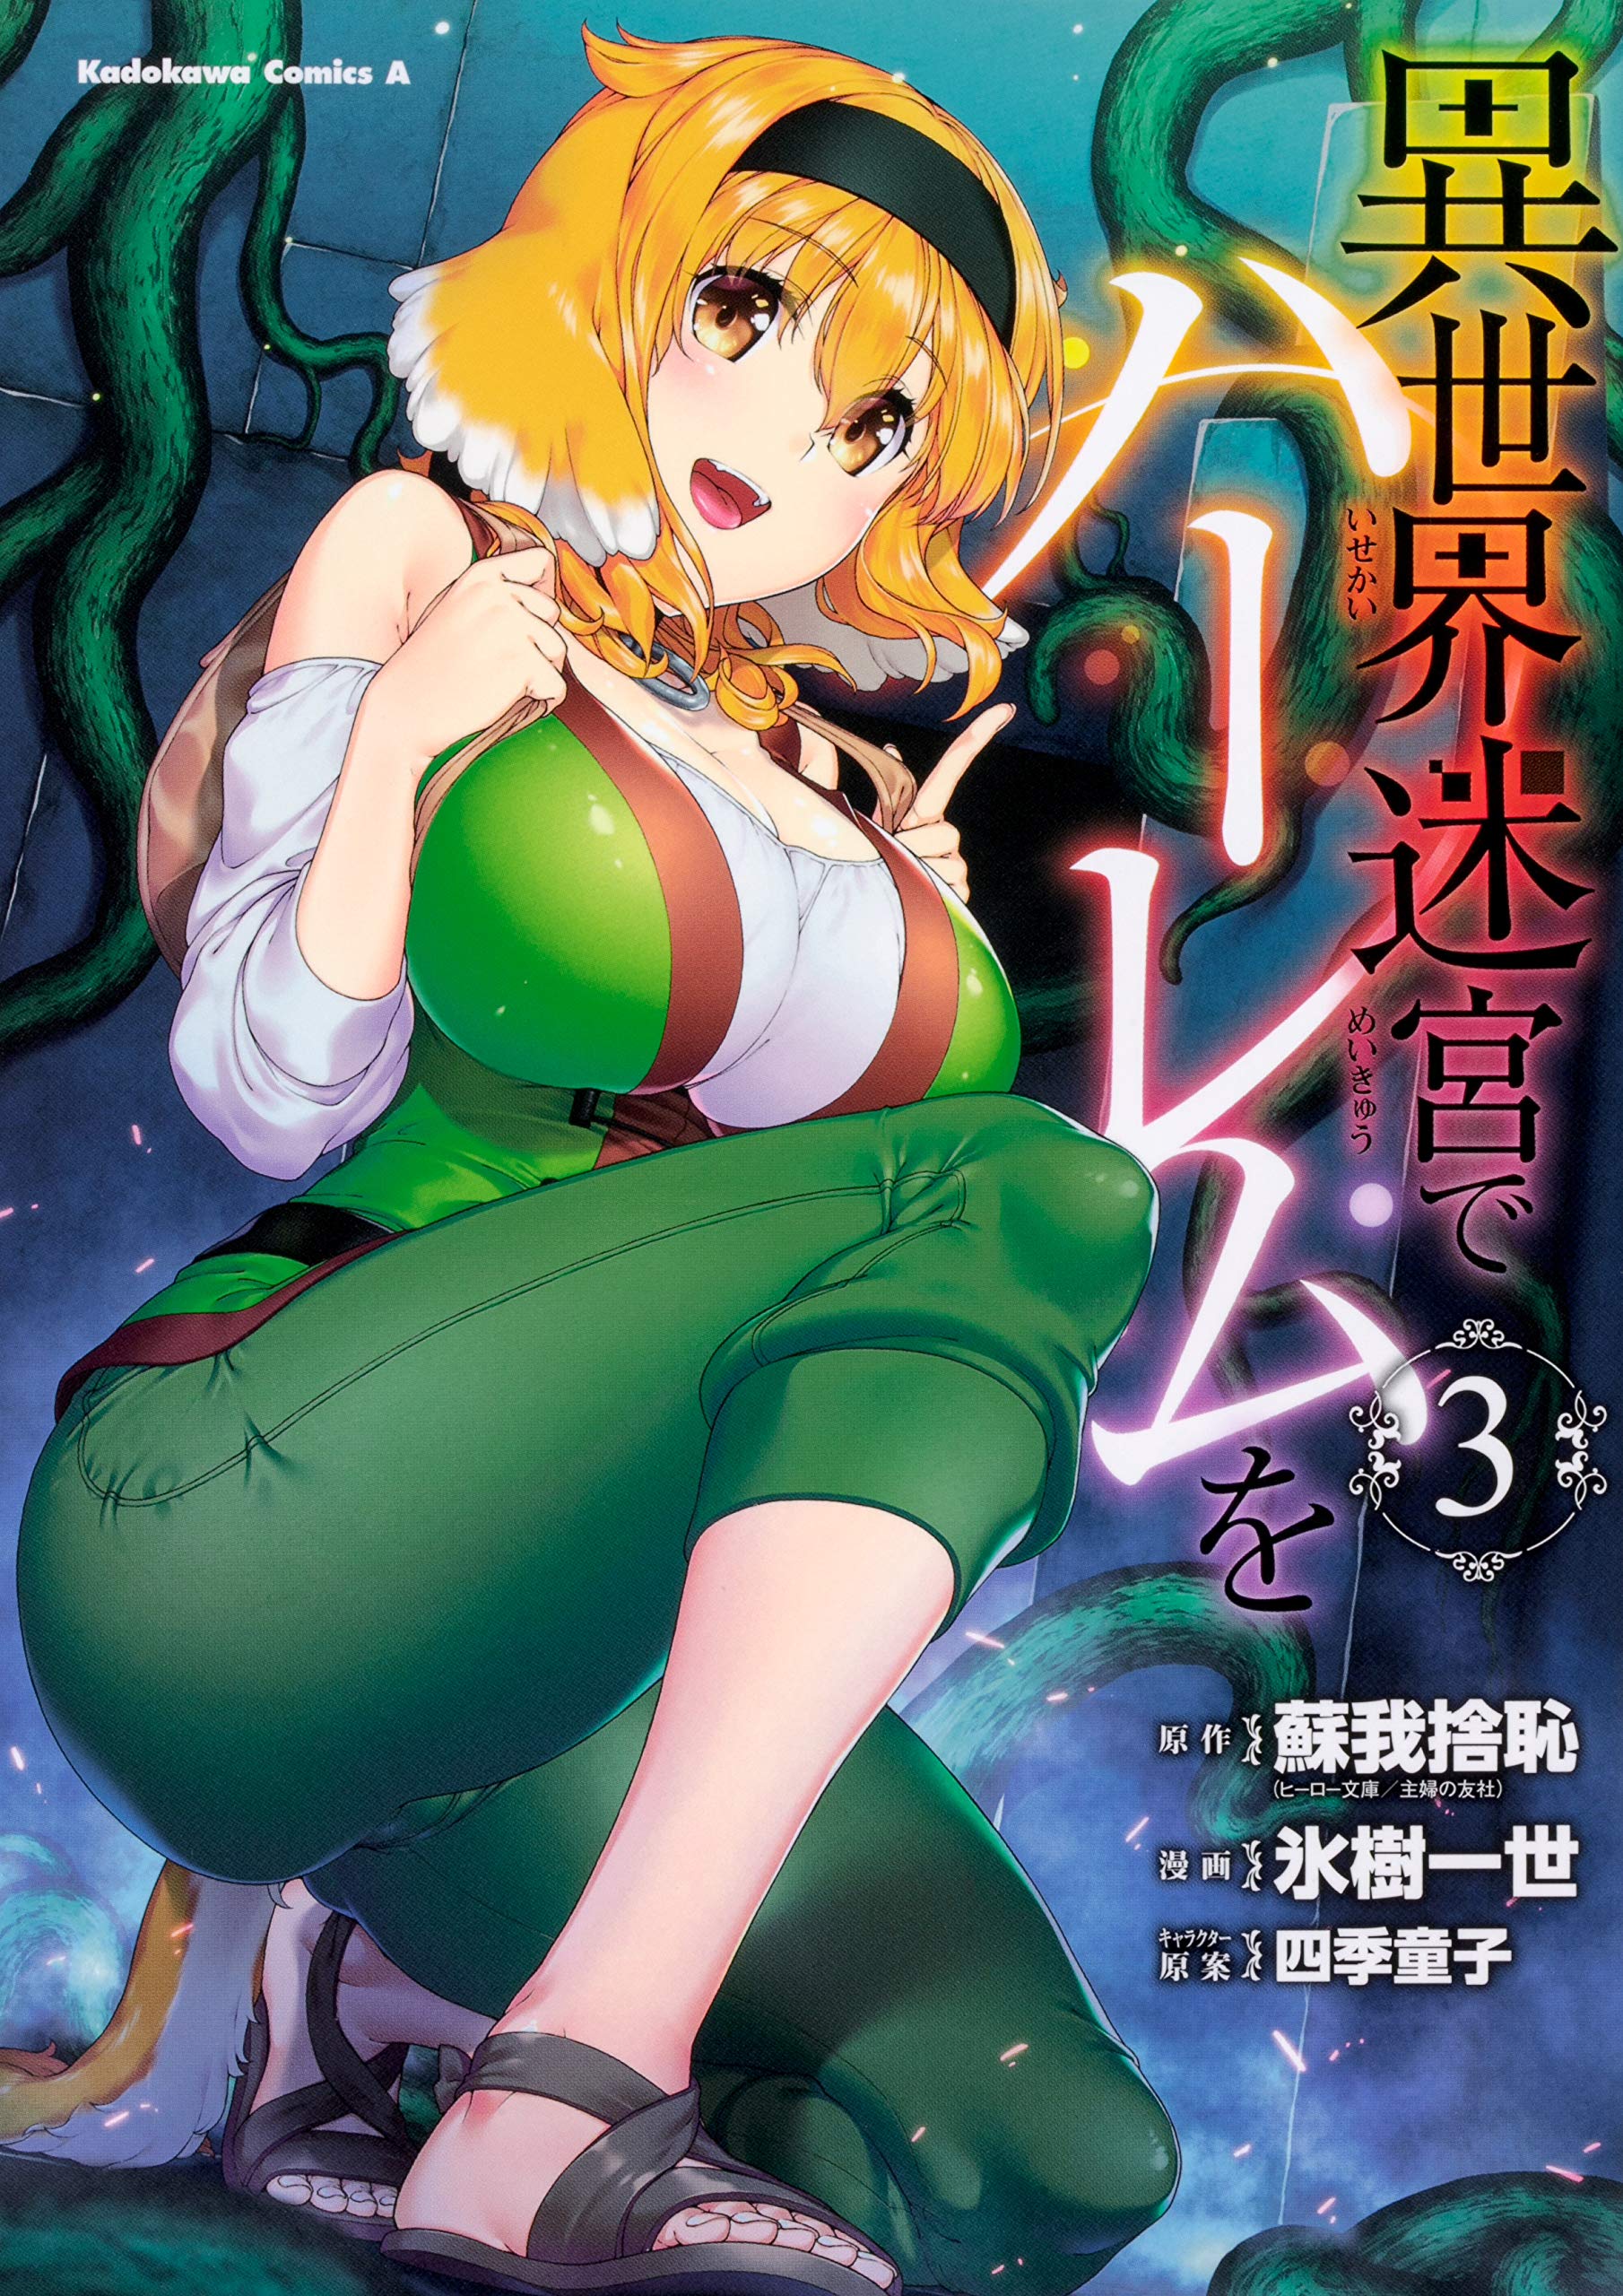 Isekai Meikyuu de Harem wo - Harem in the Labyrinth of Another